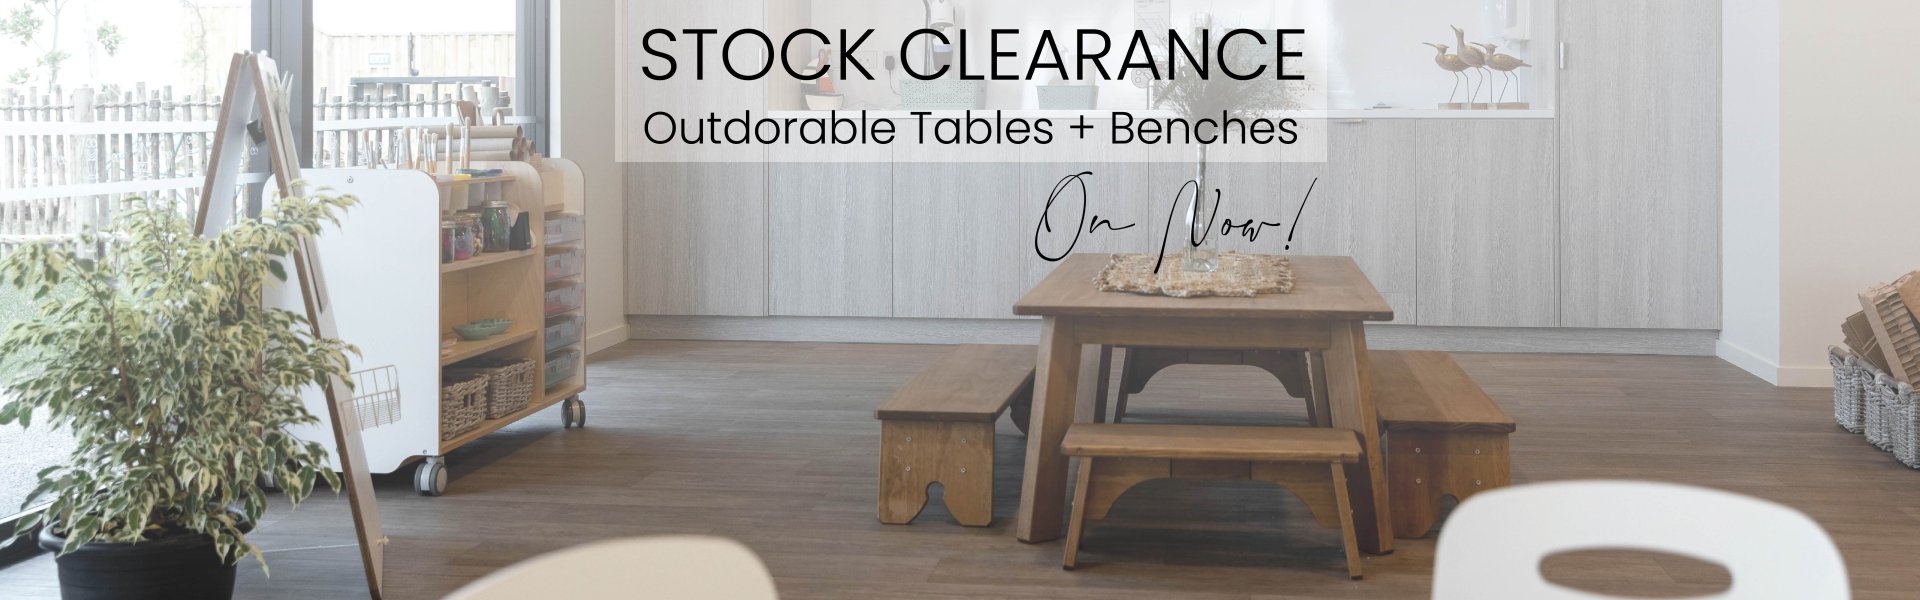 Outdorable Table Stock Clearance